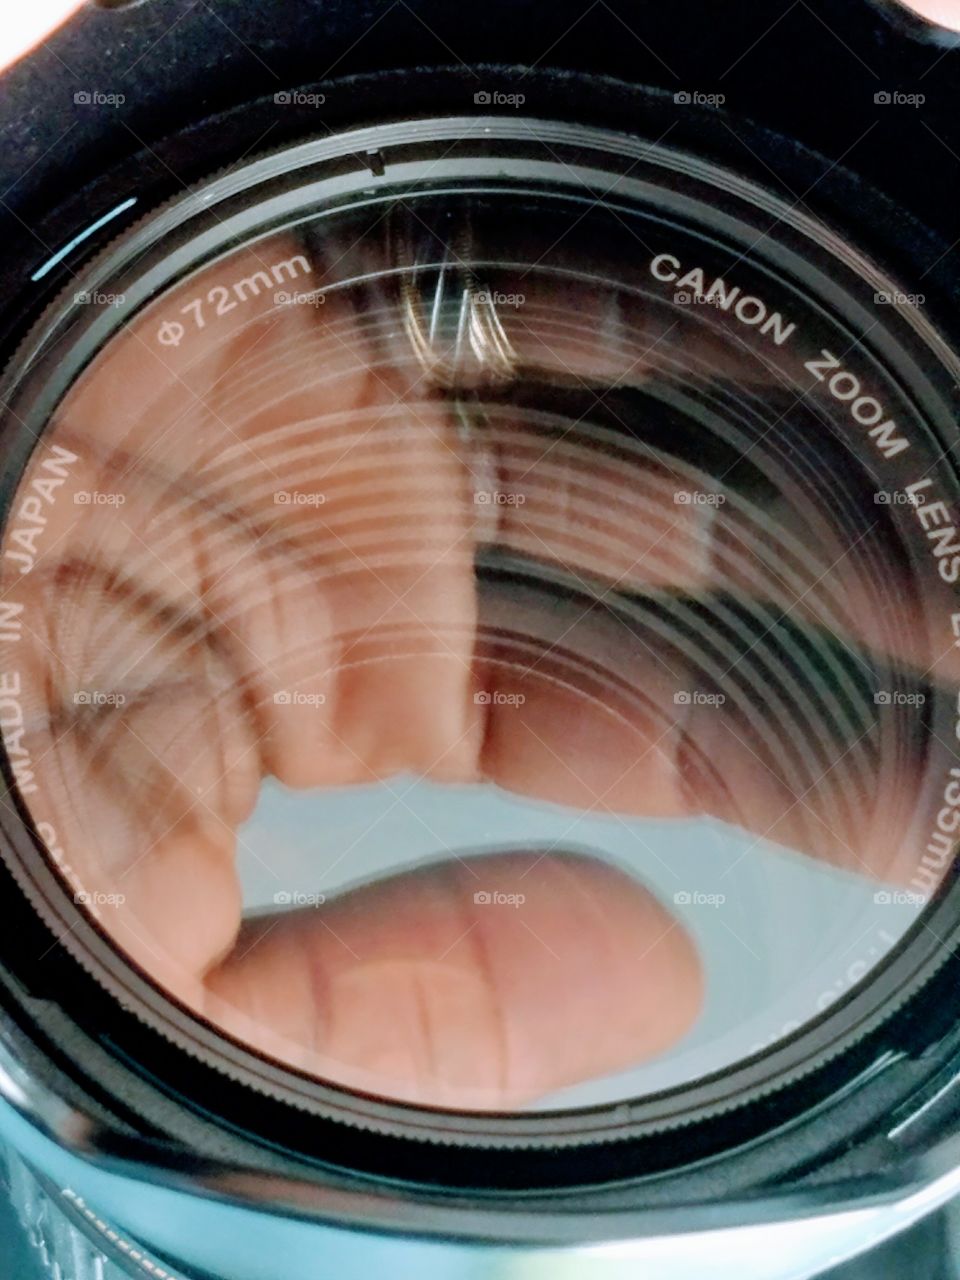 Reflection of hand on camera lens